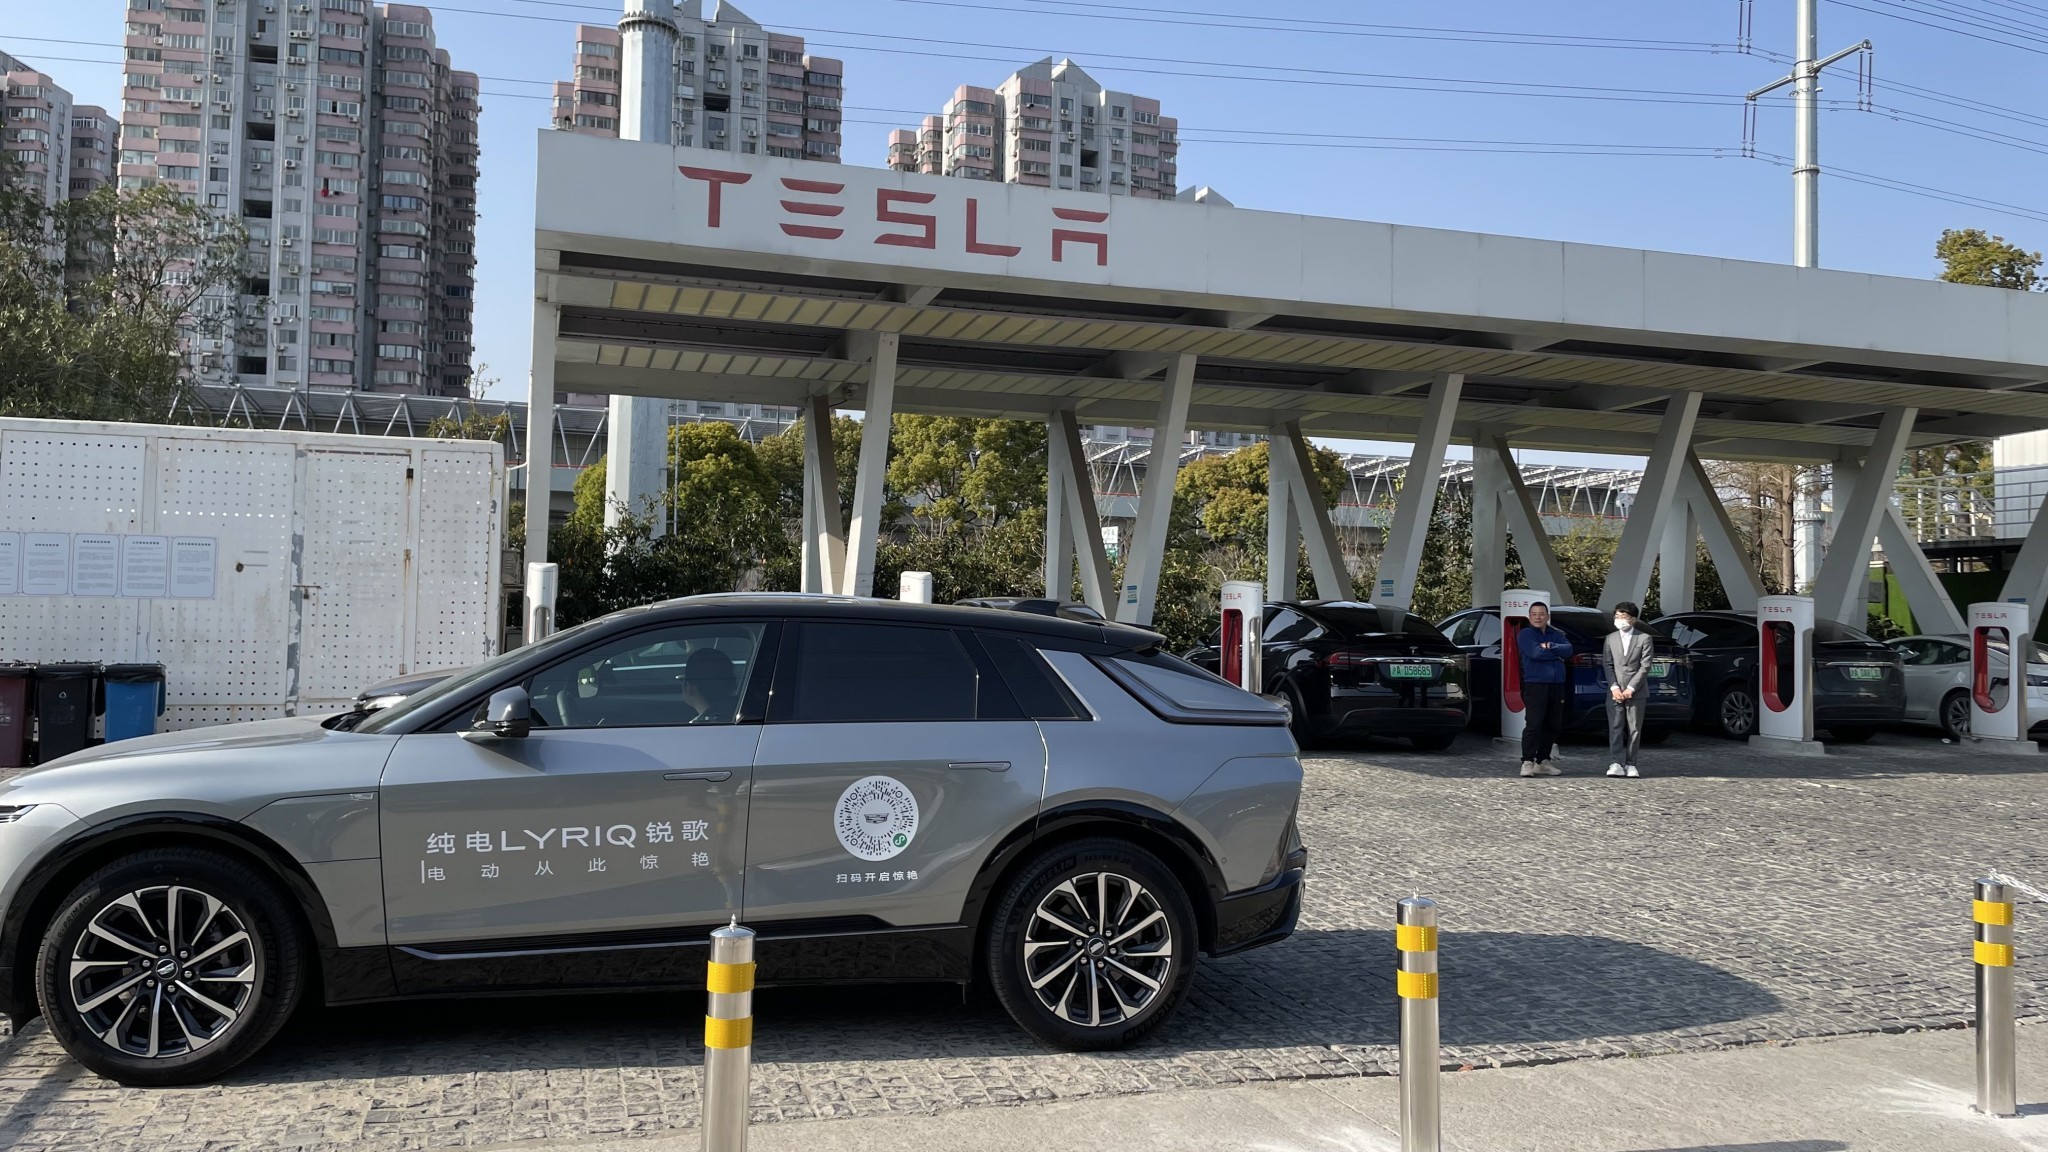 https://s1.cdn.autoevolution.com/images/news/gallery/cadillac-sales-team-is-trying-to-lure-tesla-owners-at-supercharger-with-lyriq-test-drives_2.jpg